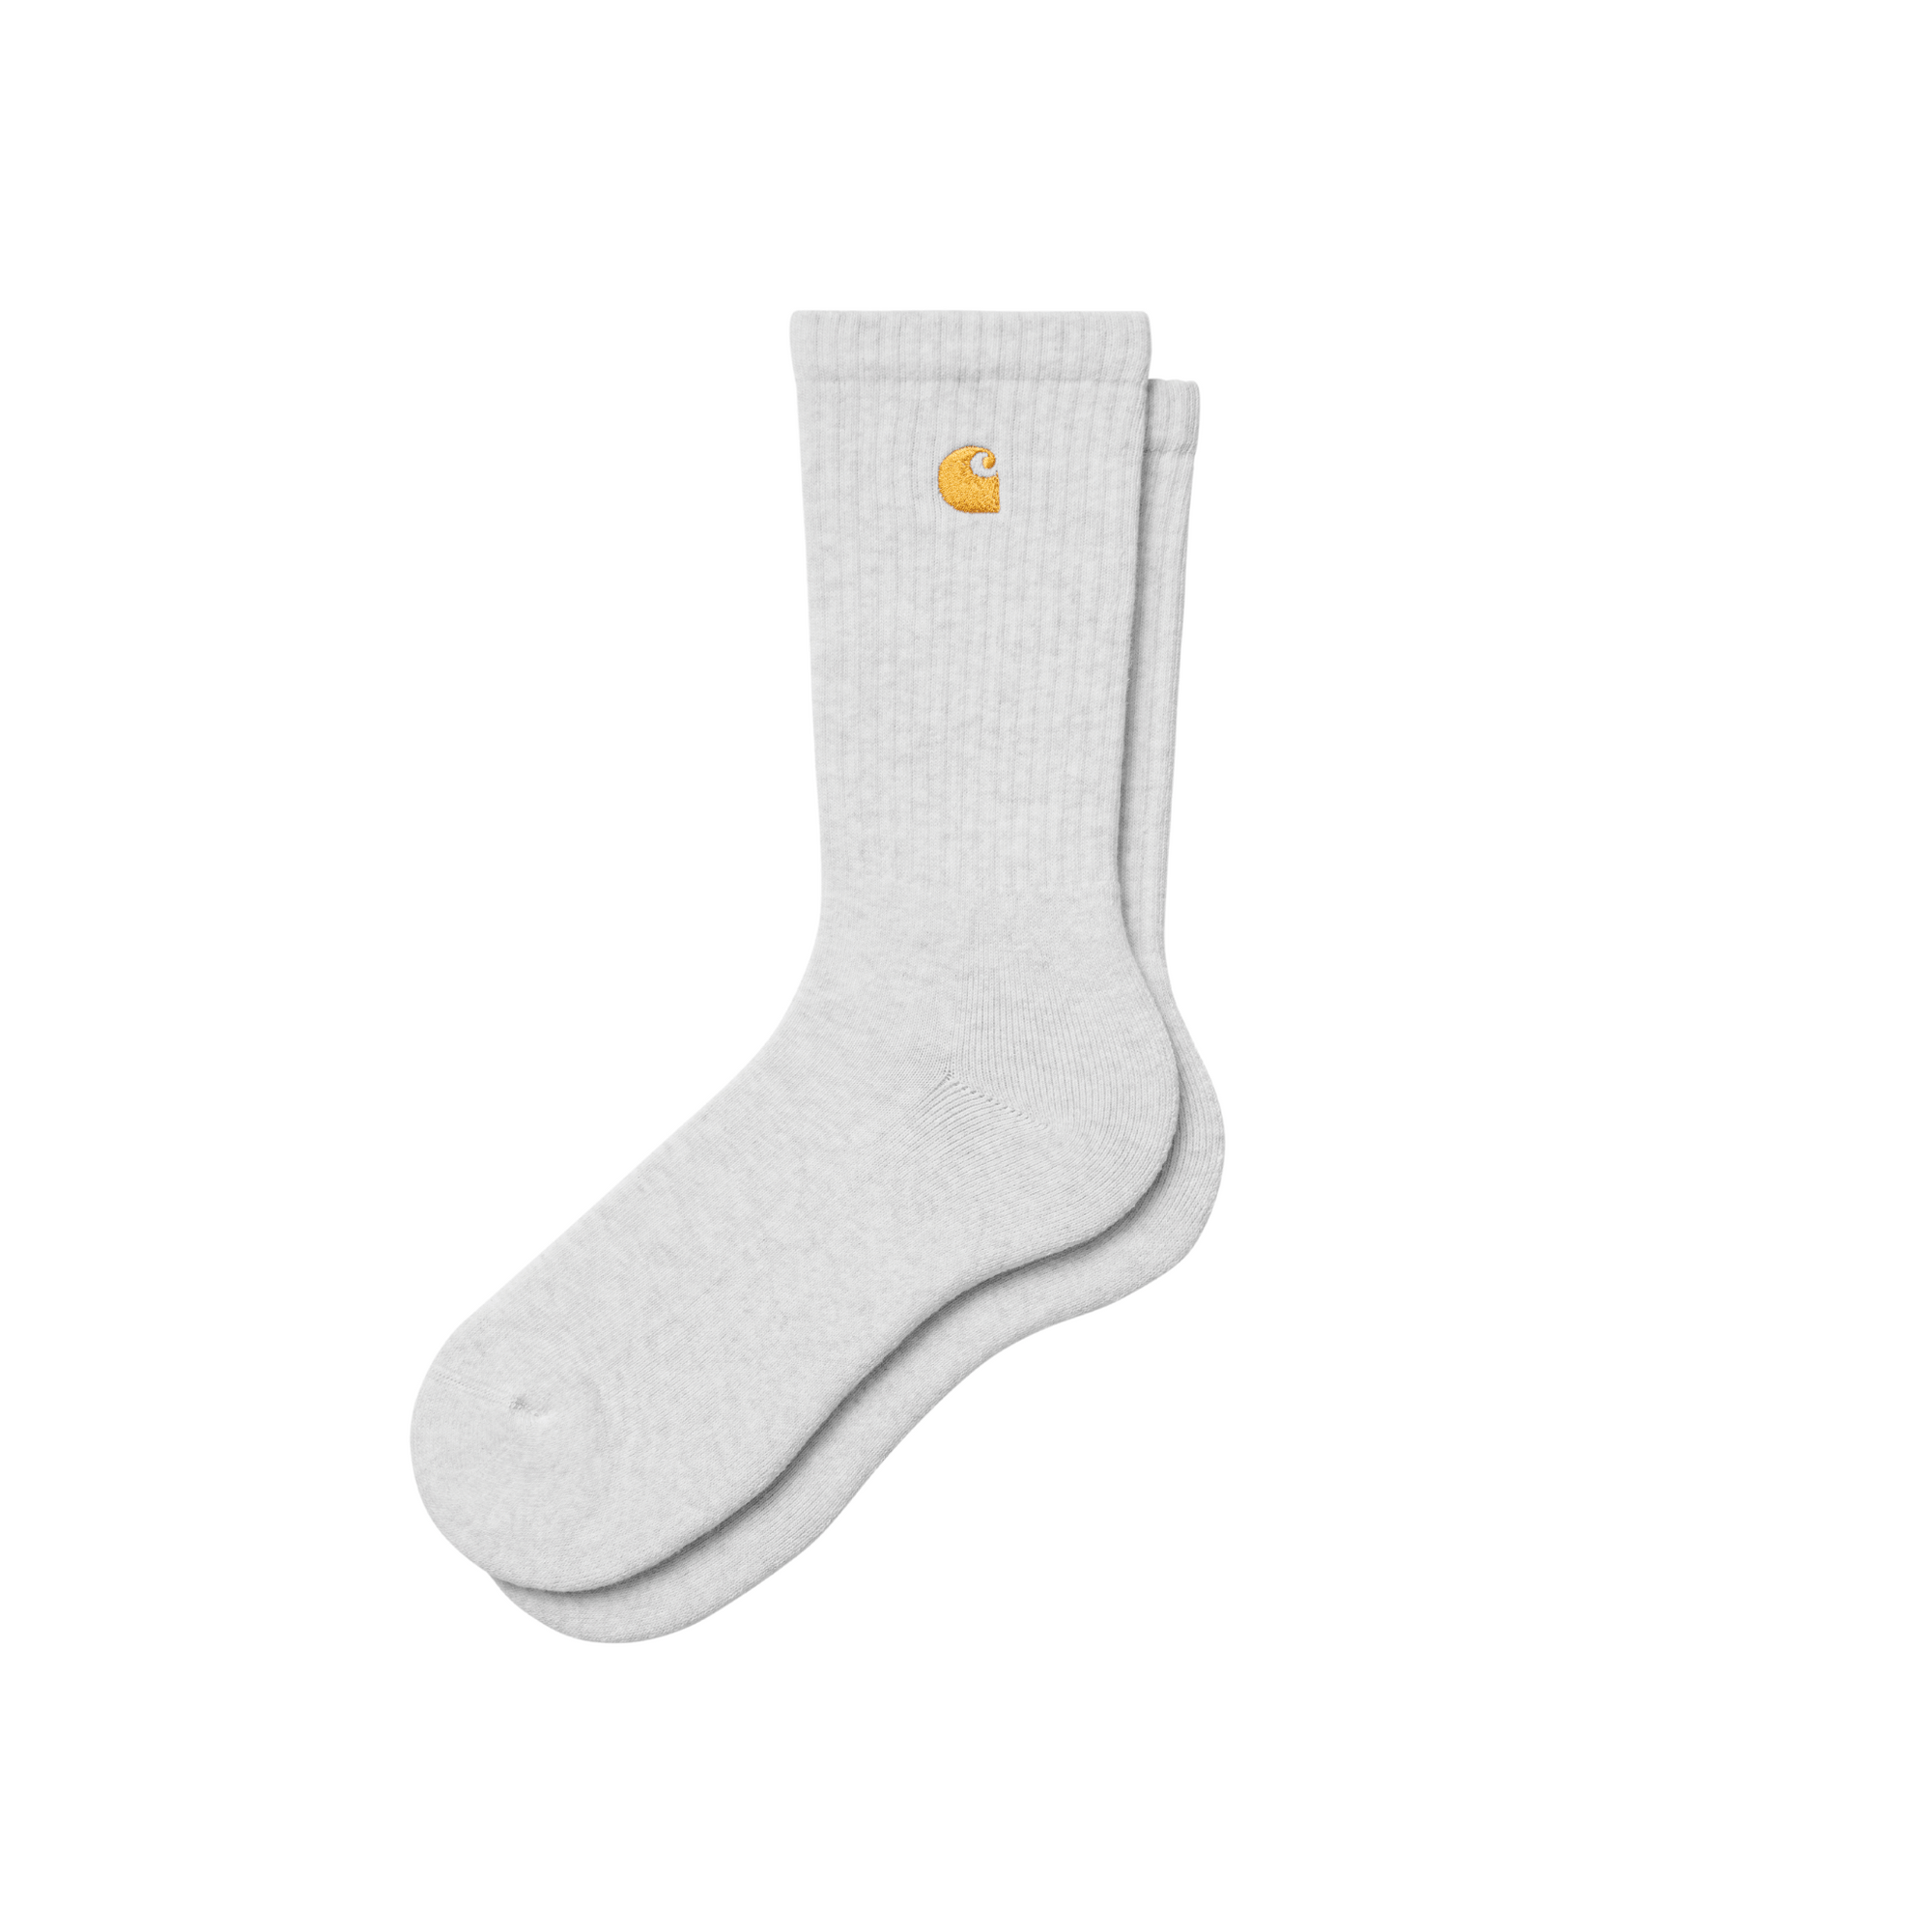 Carhartt WIP Chase Socks (ash heather/gold) - Blue Mountain Store